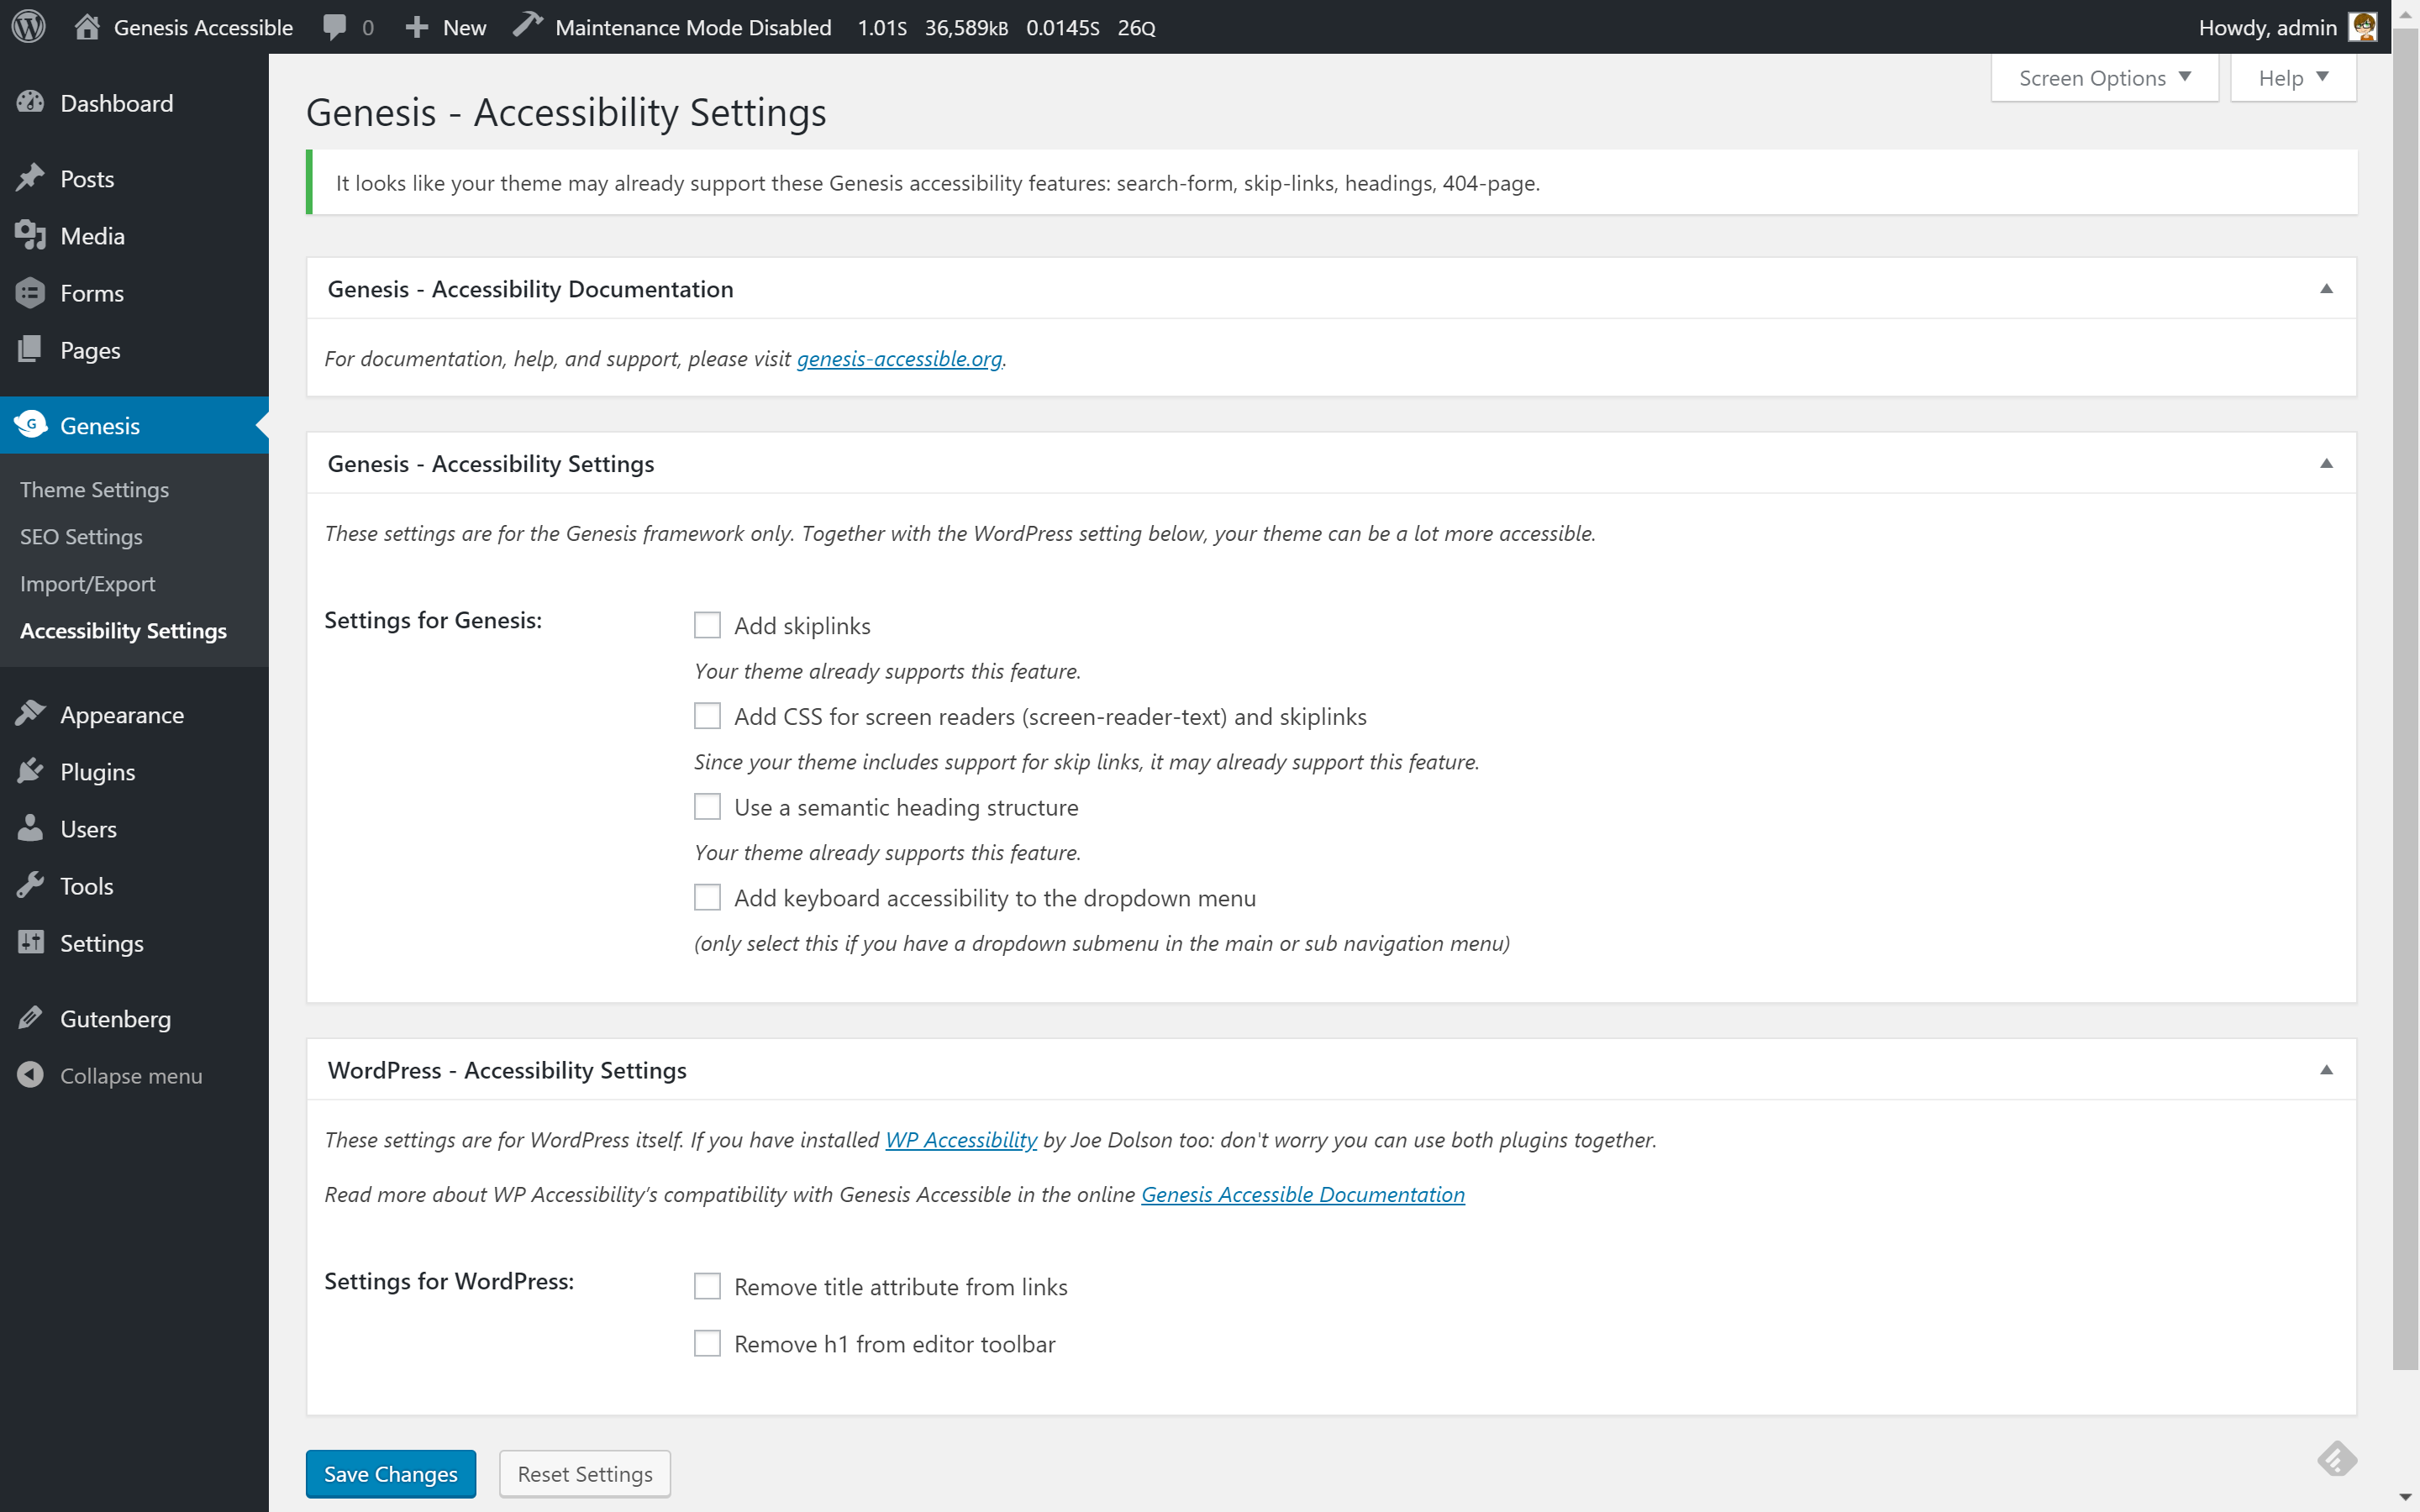 Screenshot of the Genesis Accessible settings page